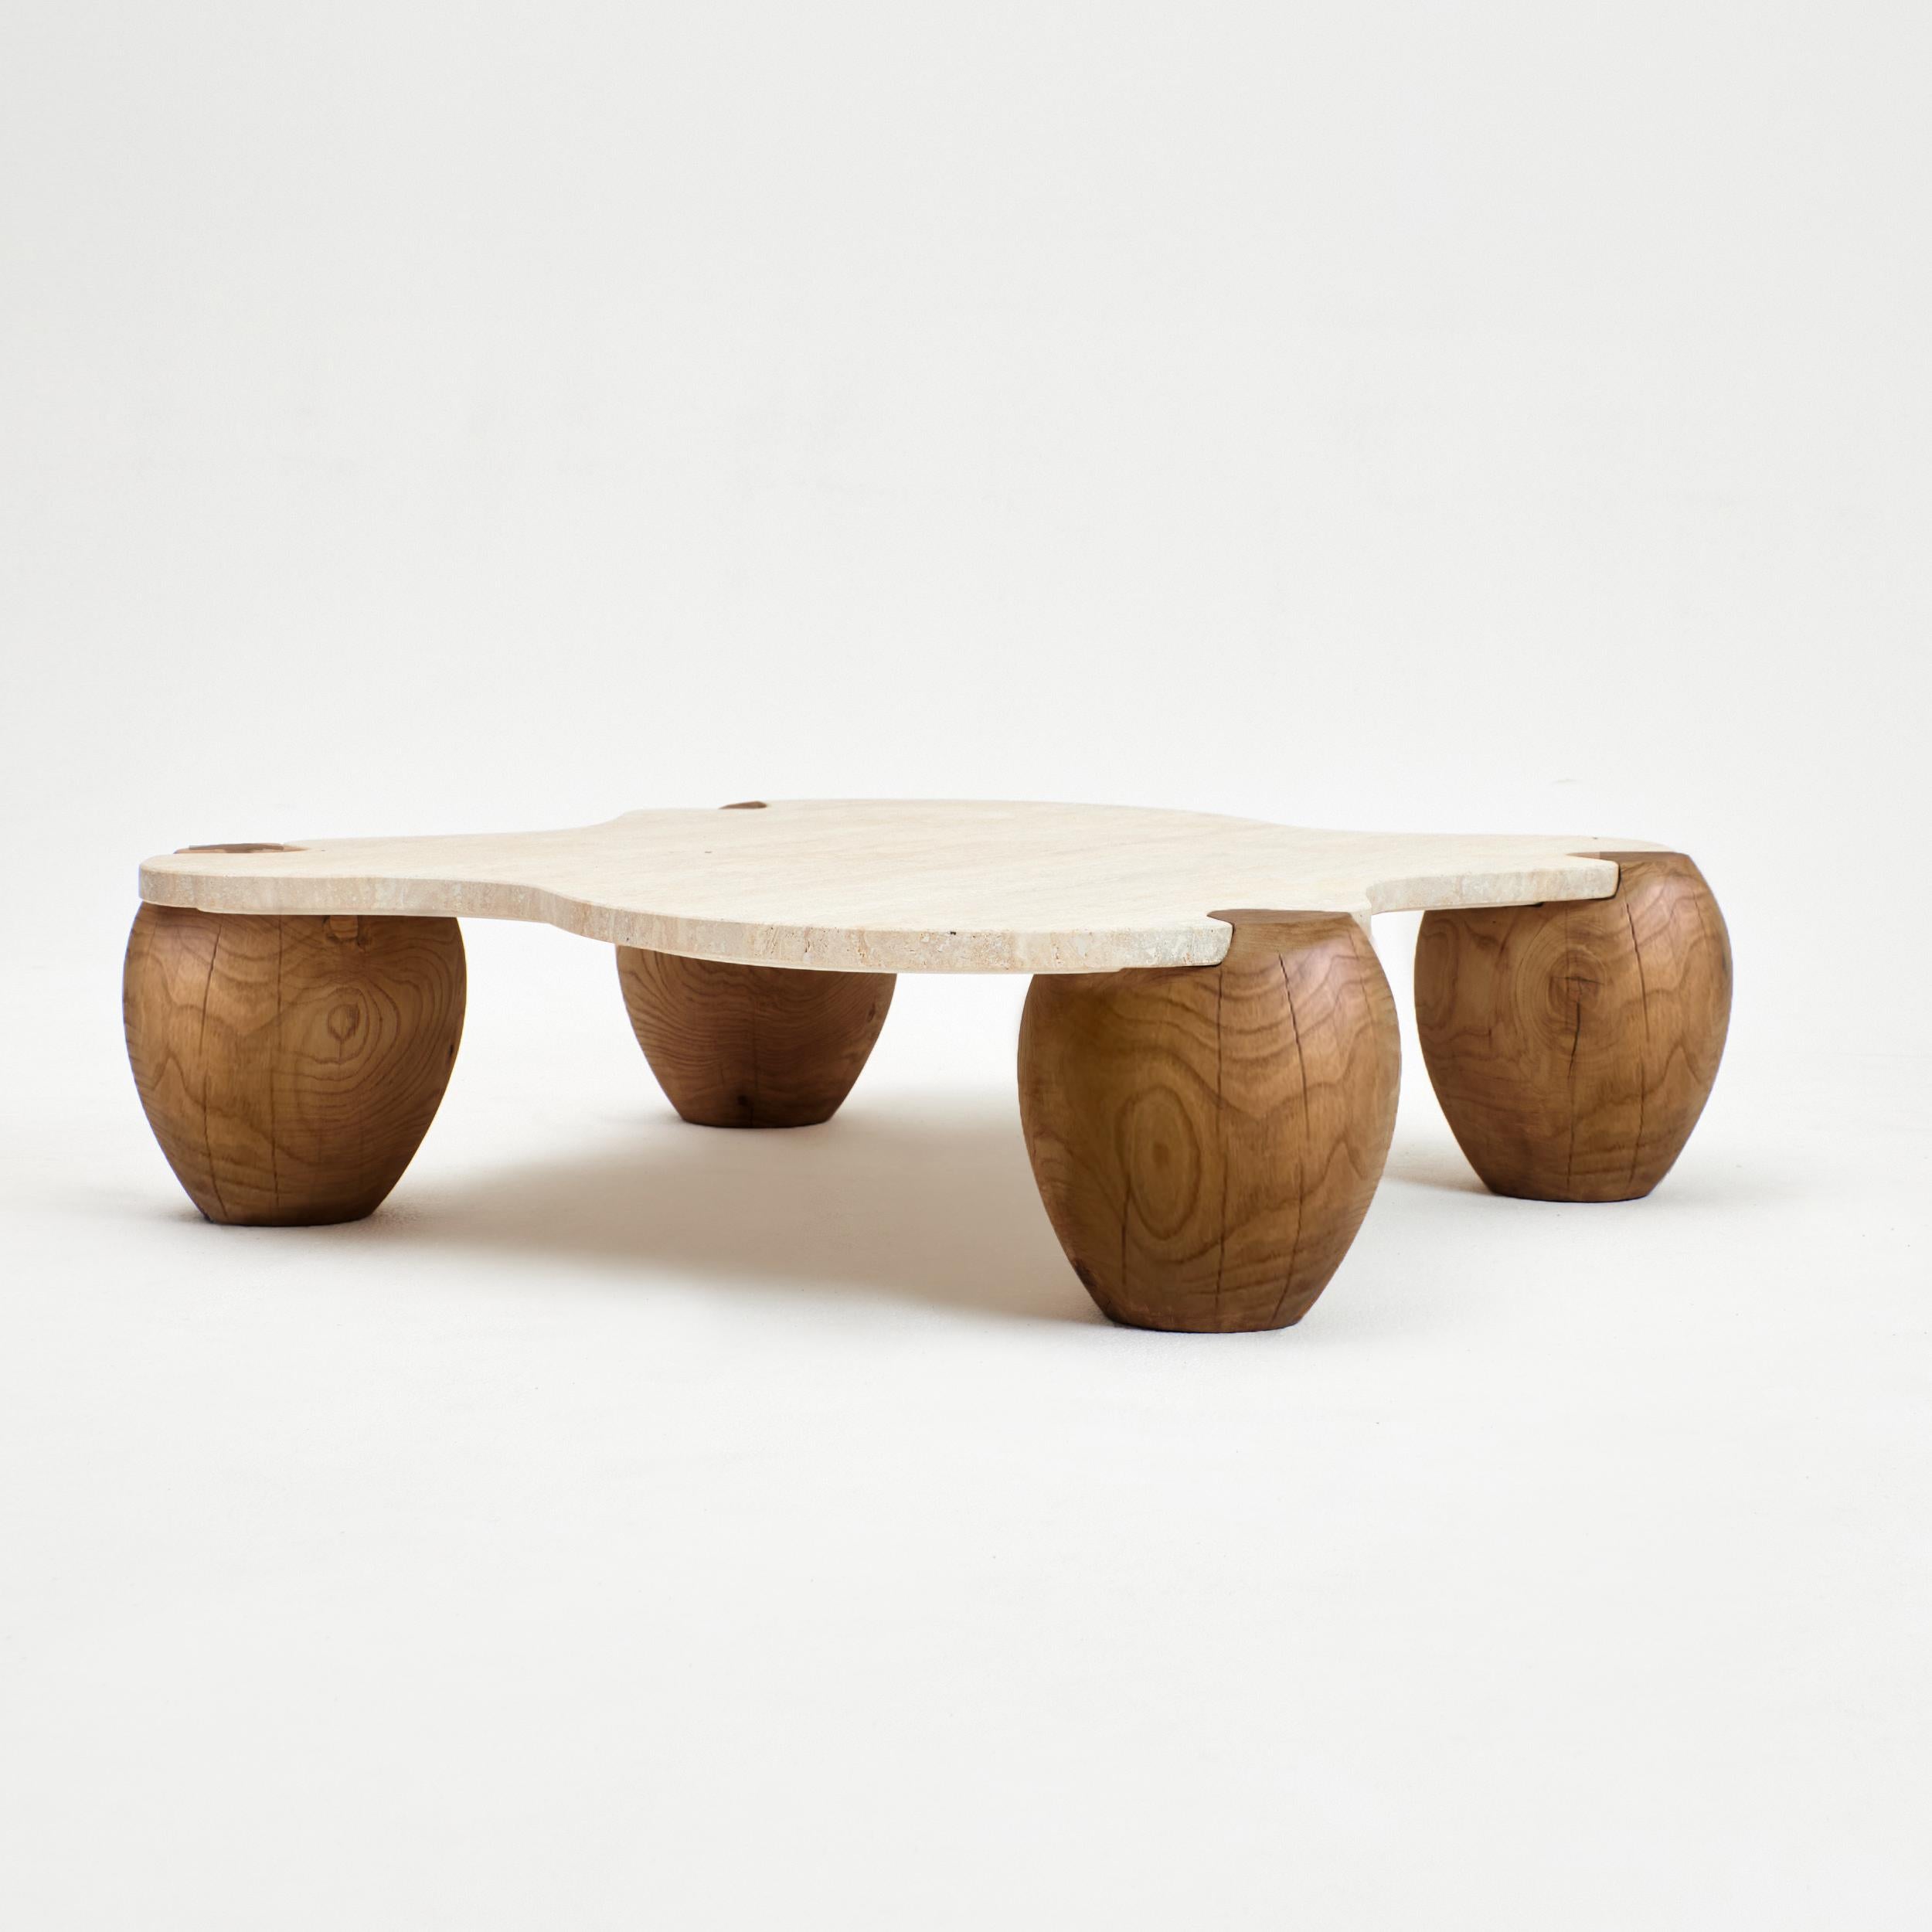 Alentejo coffee table.
Designed by Project 213A in 2022.
Made to order.
This organic-shaped coffee table stands is made from Travertine and assembles like a puzzle onto the four wooden legs. Each legs is made from solid chestnut wood and is